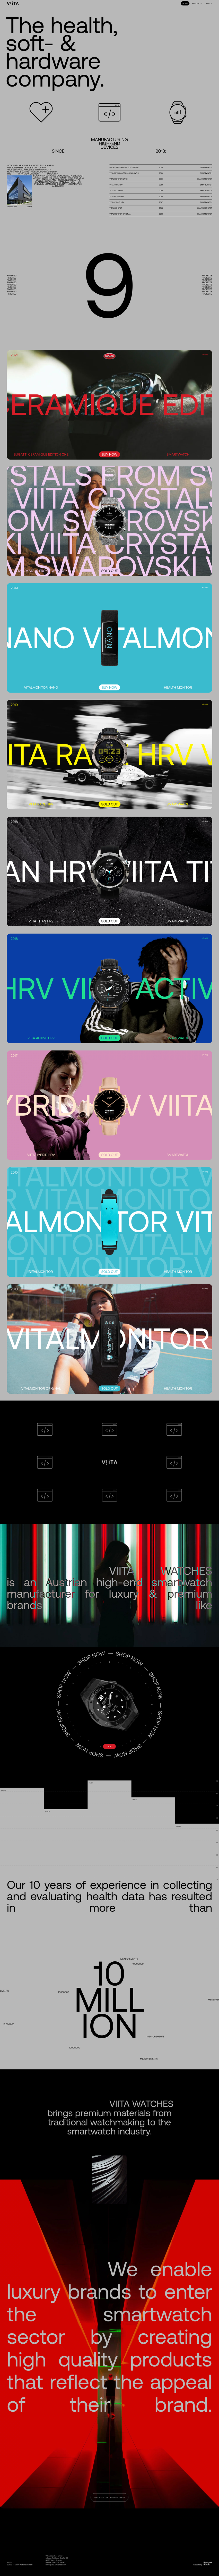 VIITA Watches Landing Page Example: VIITA Watches combine the qualities of traditional watches with the technical possibilities of a smartwatch. 